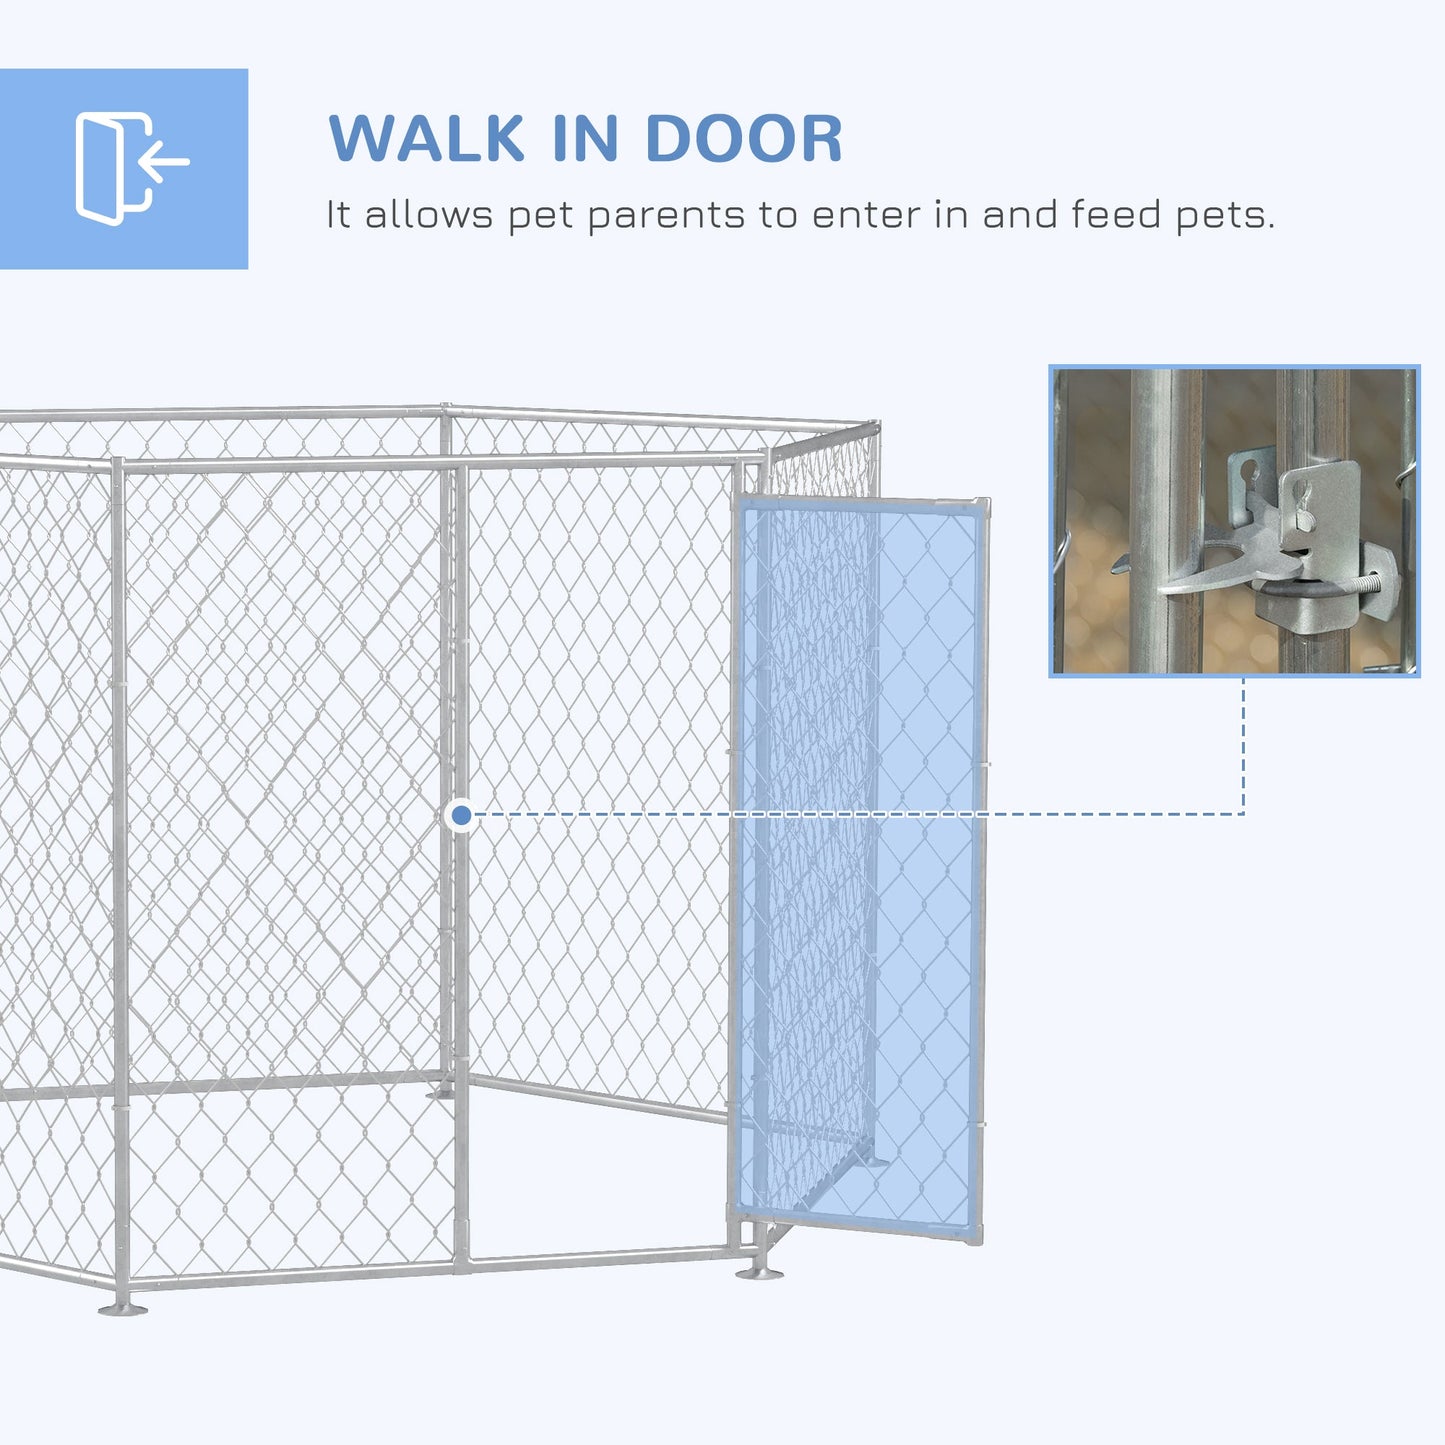 -PawHut 9.2' x 8' x 5.6' Dog Kennel Outdoor for Medium and Large-Sized Dogs with Lockable Door, Silver - Outdoor Style Company